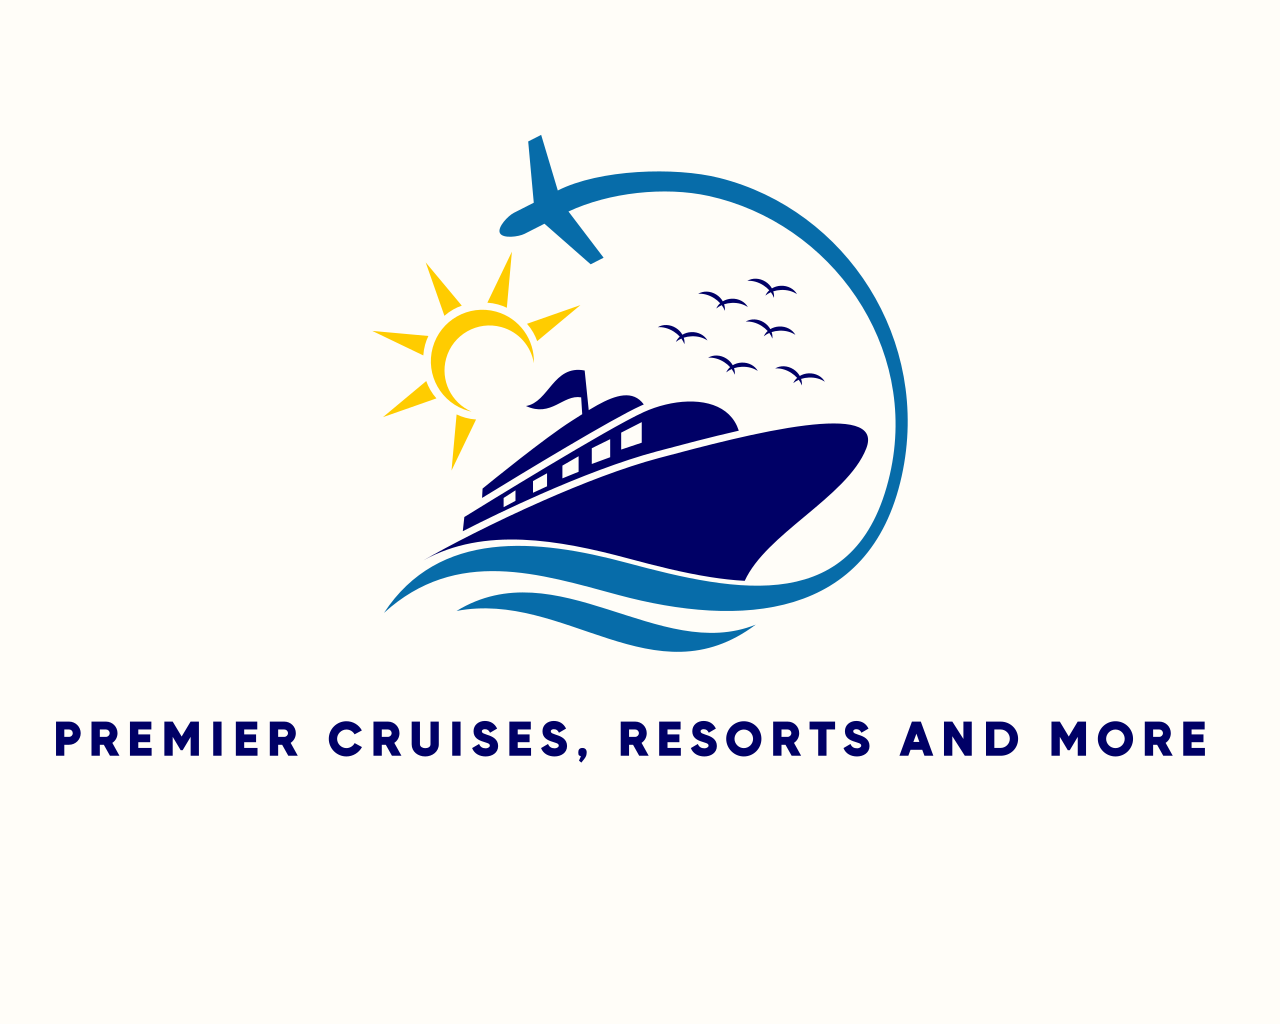 Premier Cruises, Resorts and More